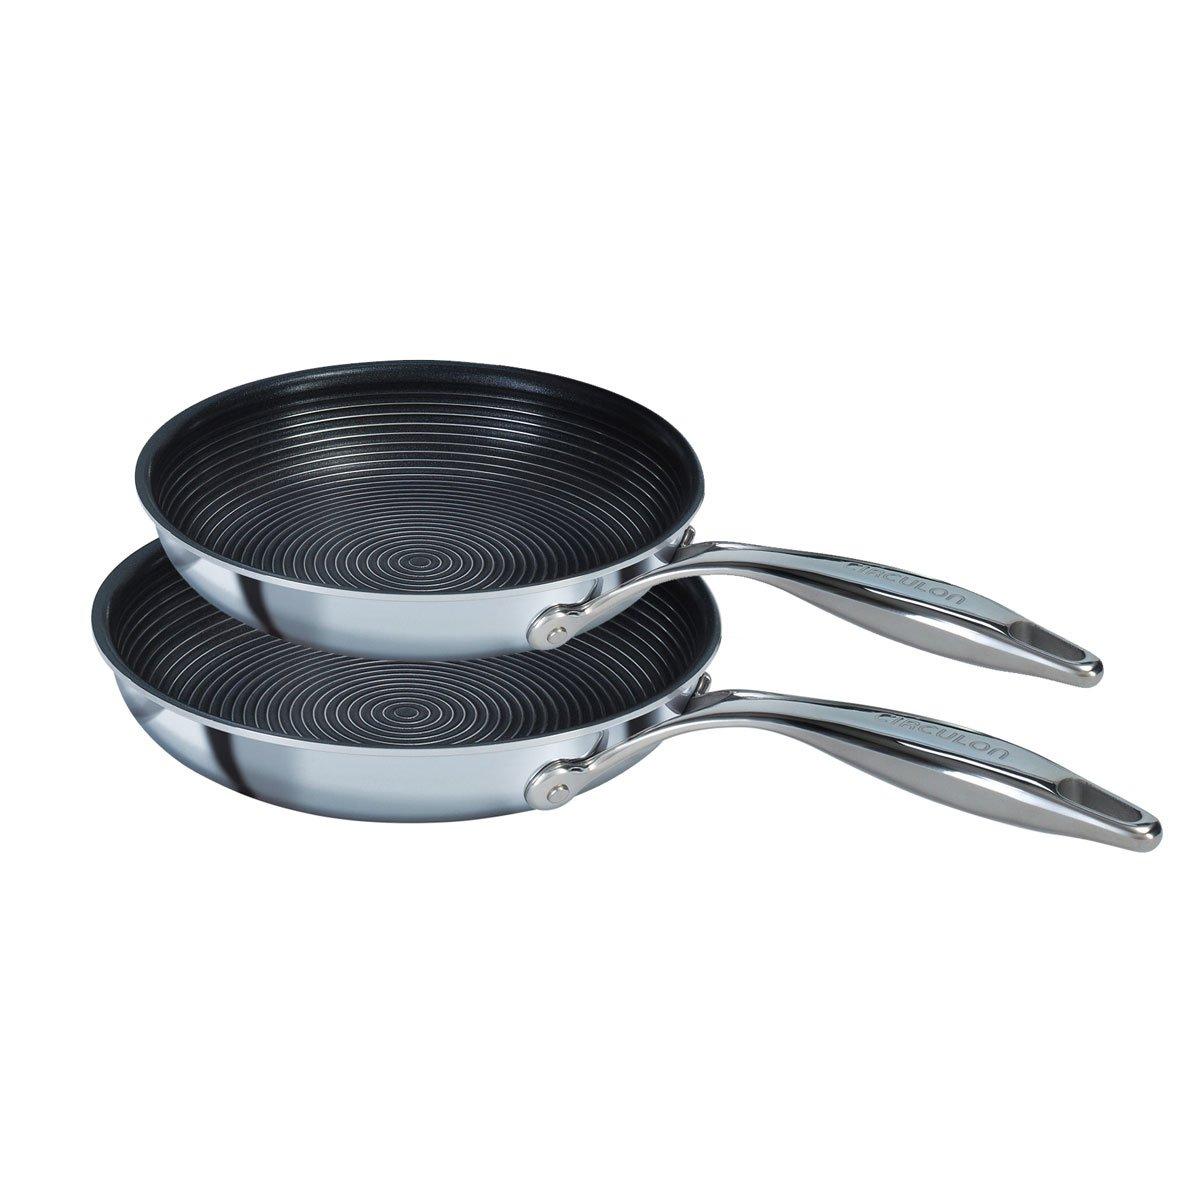 Twin Skillet Set in Stainless Steel Non Stick Frying Pans - 22/25 cm